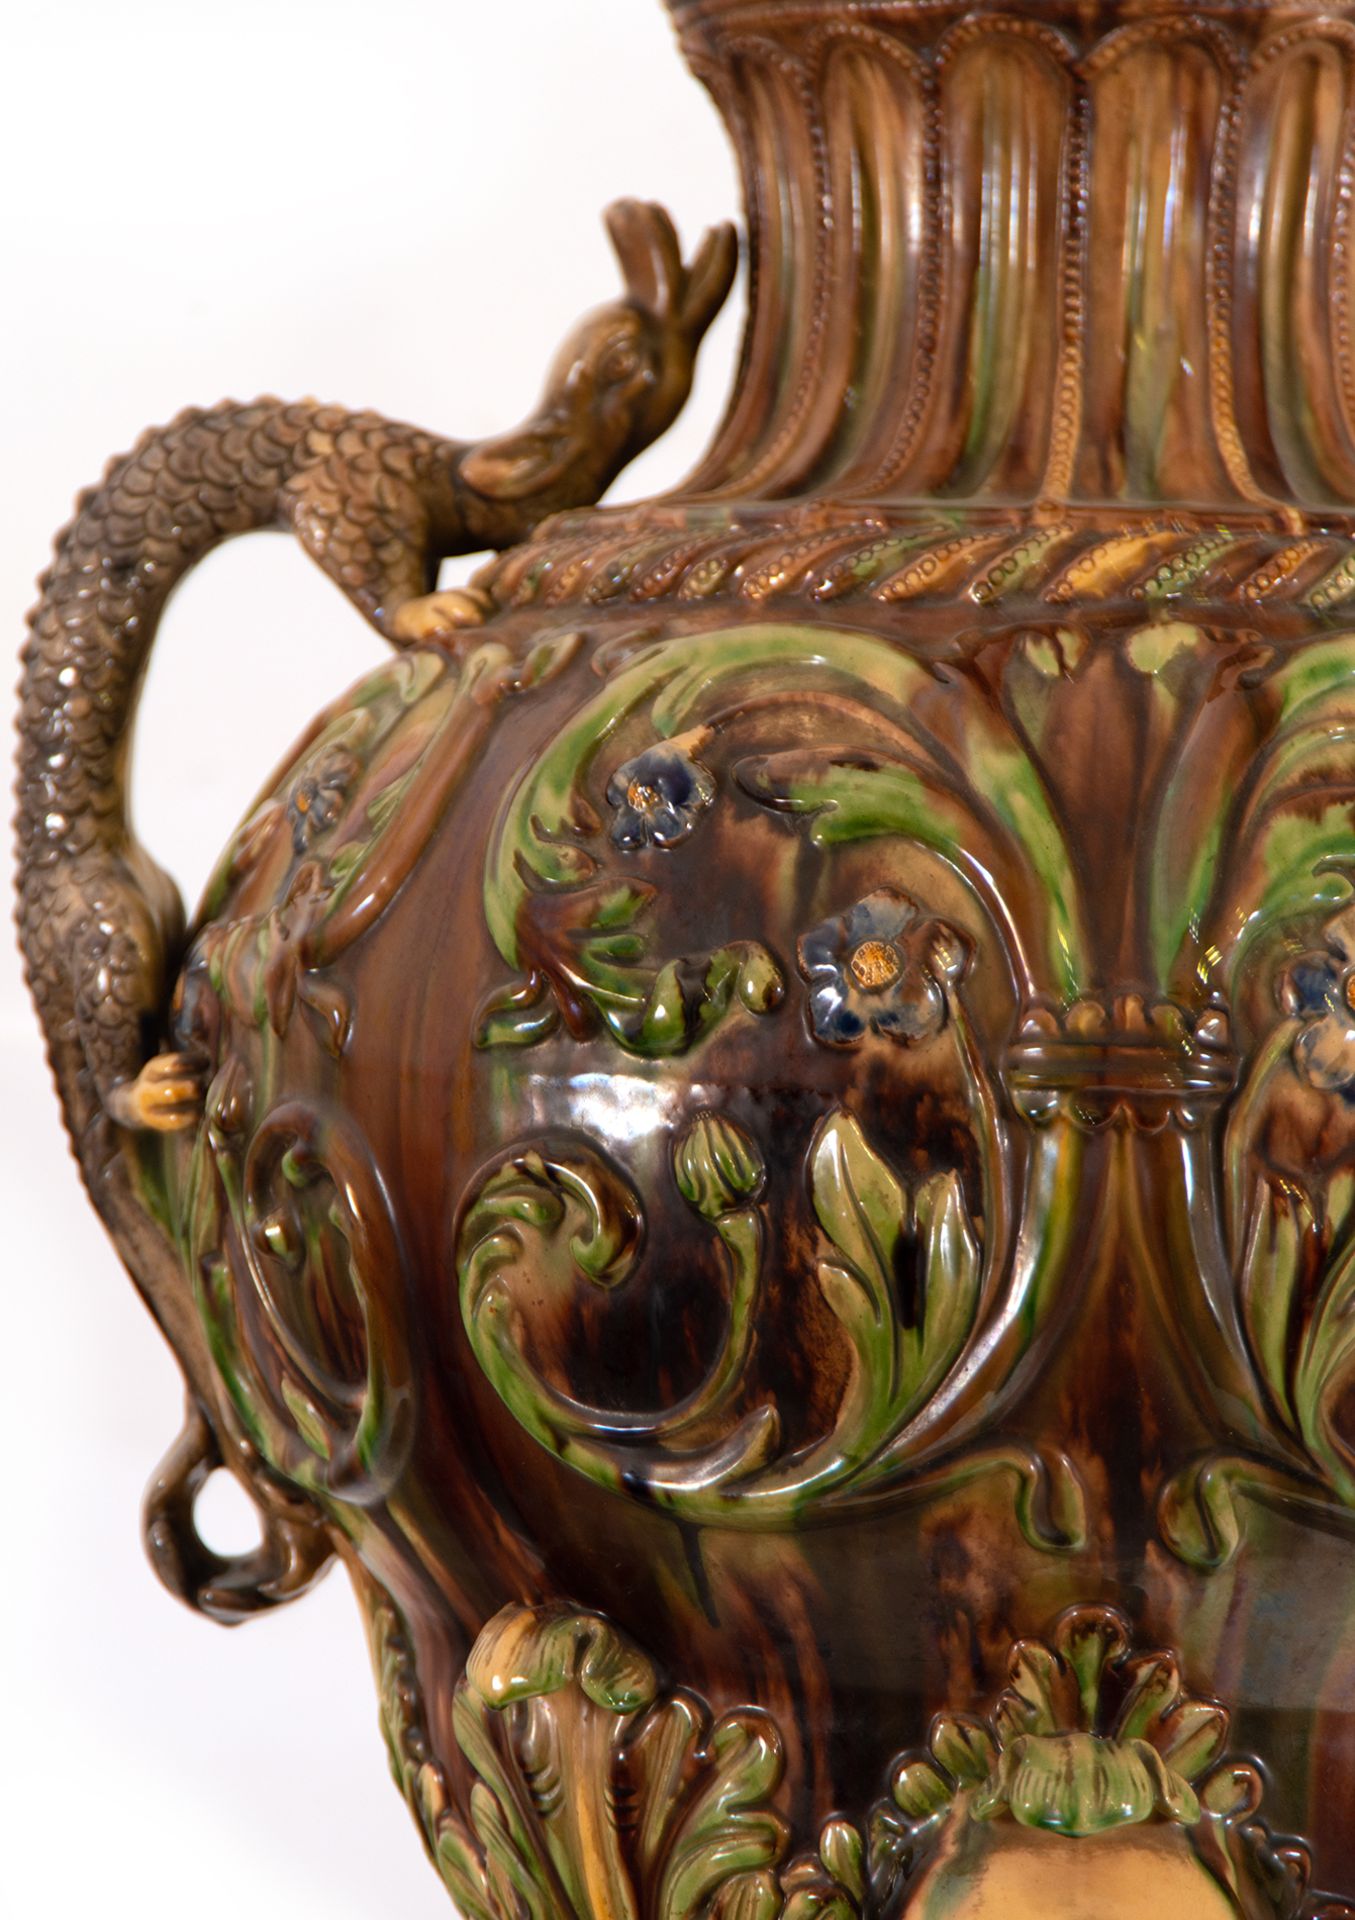 Ewer in enameled stoneware in the Art Nouveau style, French or Italian school of the 19th - 20th cen - Image 9 of 11